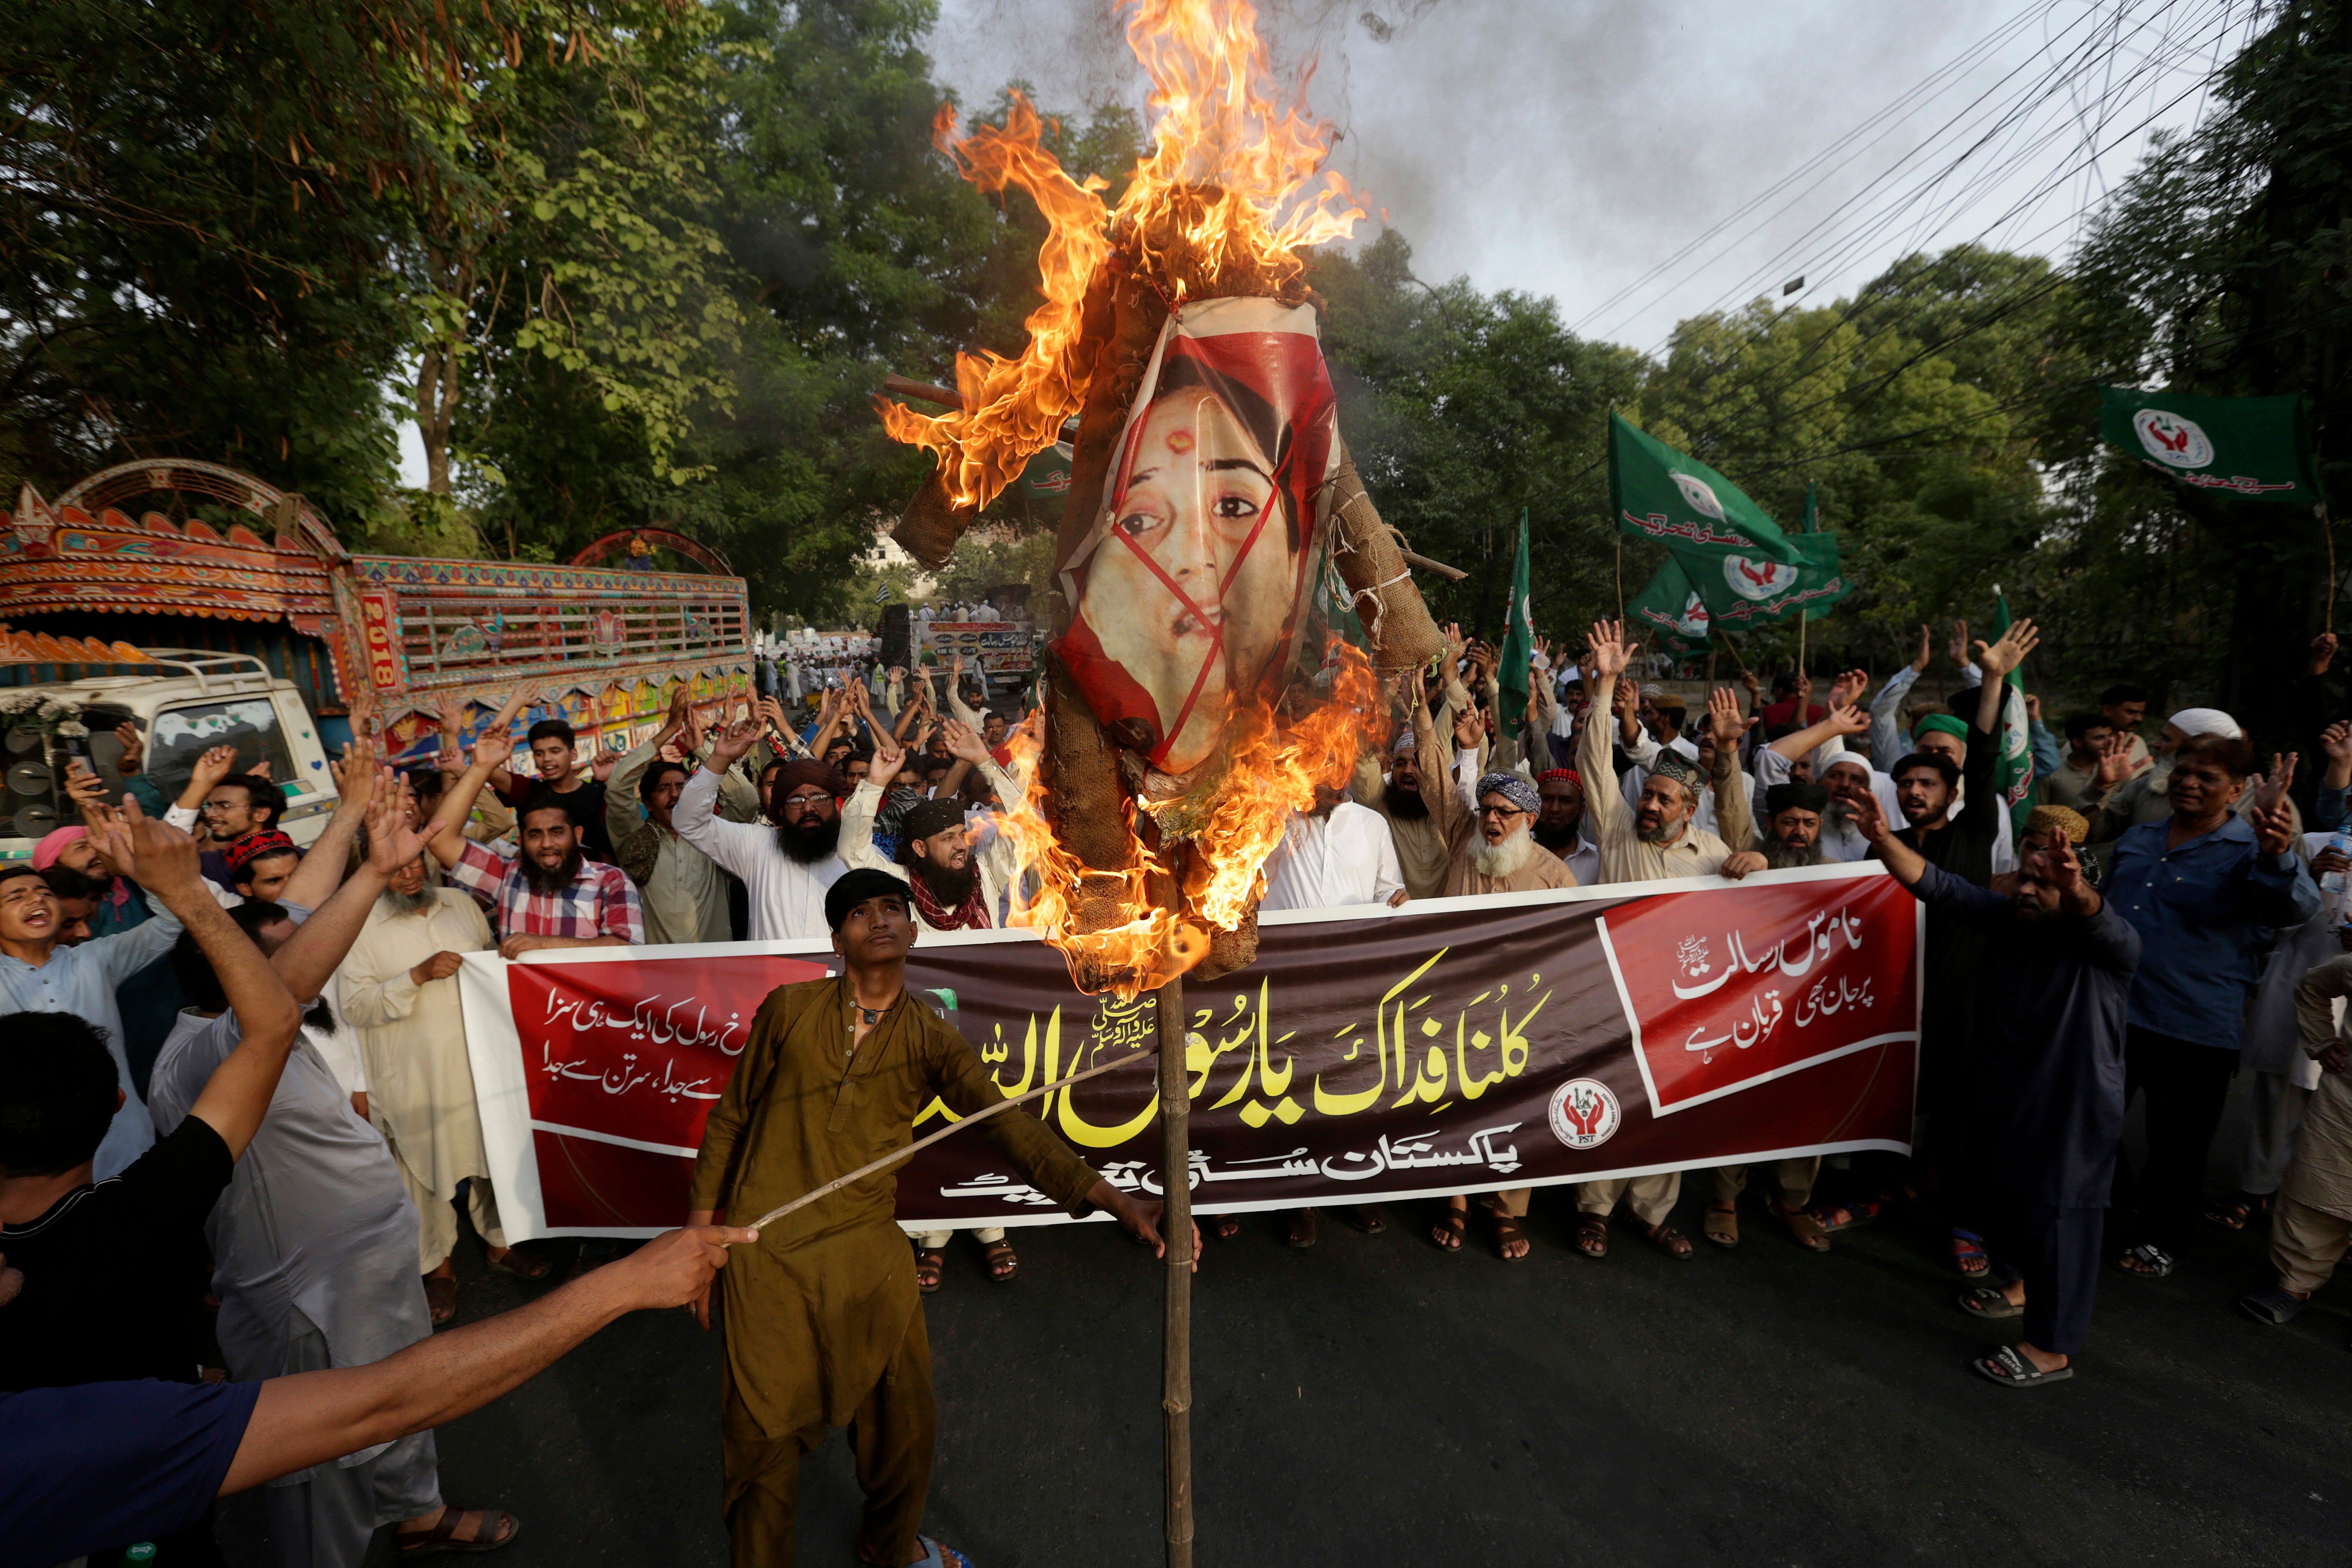 Supporters of a religious group burn a picture of BJP member Nupur Sharma during a demonstration in Lahore, Pakistan, on 12 June to condemn derogatory references to Islam made by her